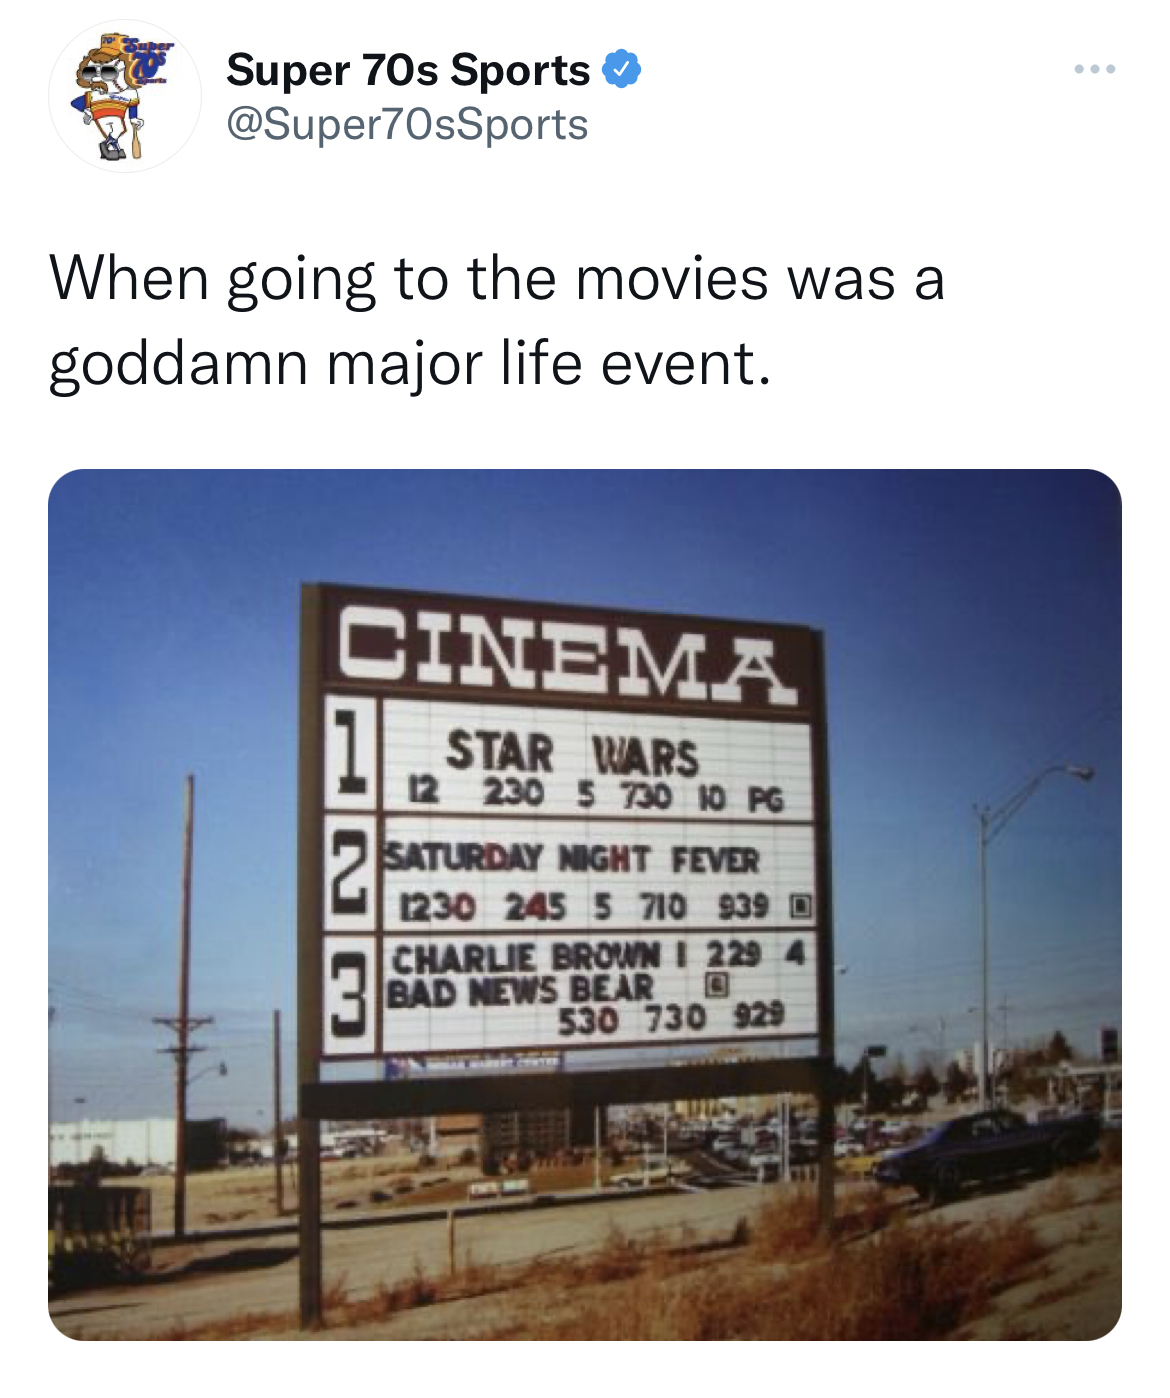 Fresh and funny tweets - 1970s movie theaters - Super 70s Sports When going to the movies was a goddamn major life event. Cinema Star Wars 12 230 5 730 10 Pg Saturday Night Fever 1230 245 5 710 939 In Charlie Brown I 229 4 Bad News Bear 530 730 929 www